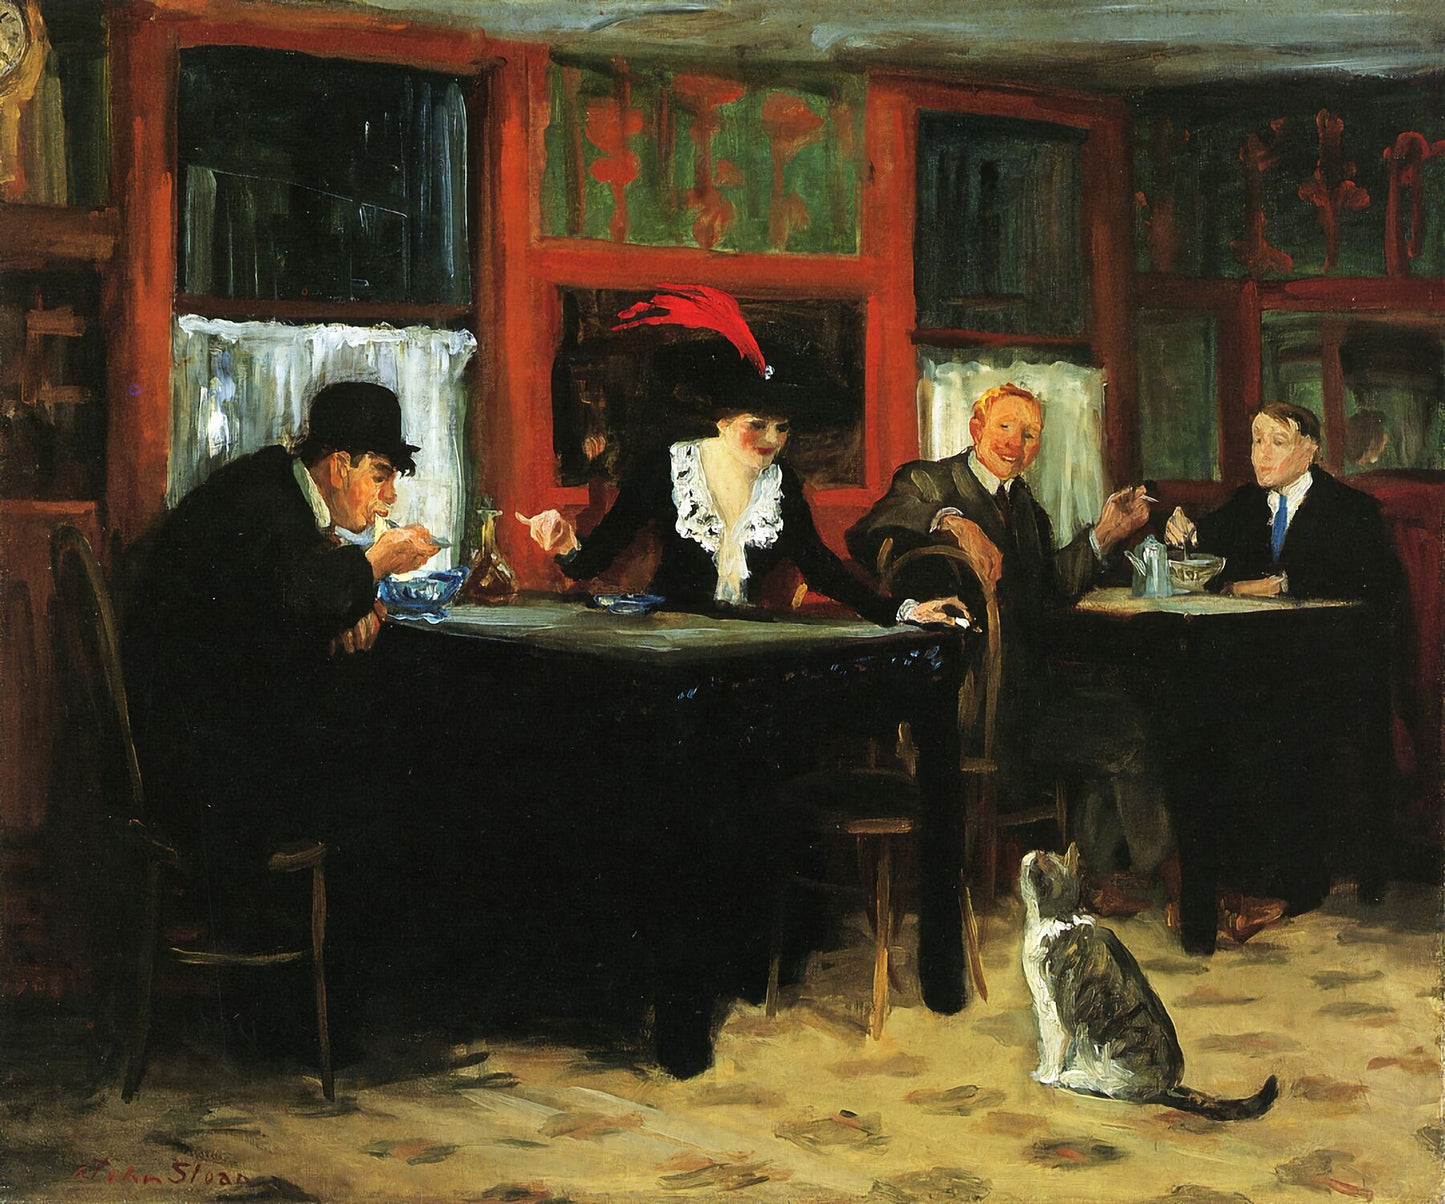 Chinese Restaurant by John French Sloan - 1909